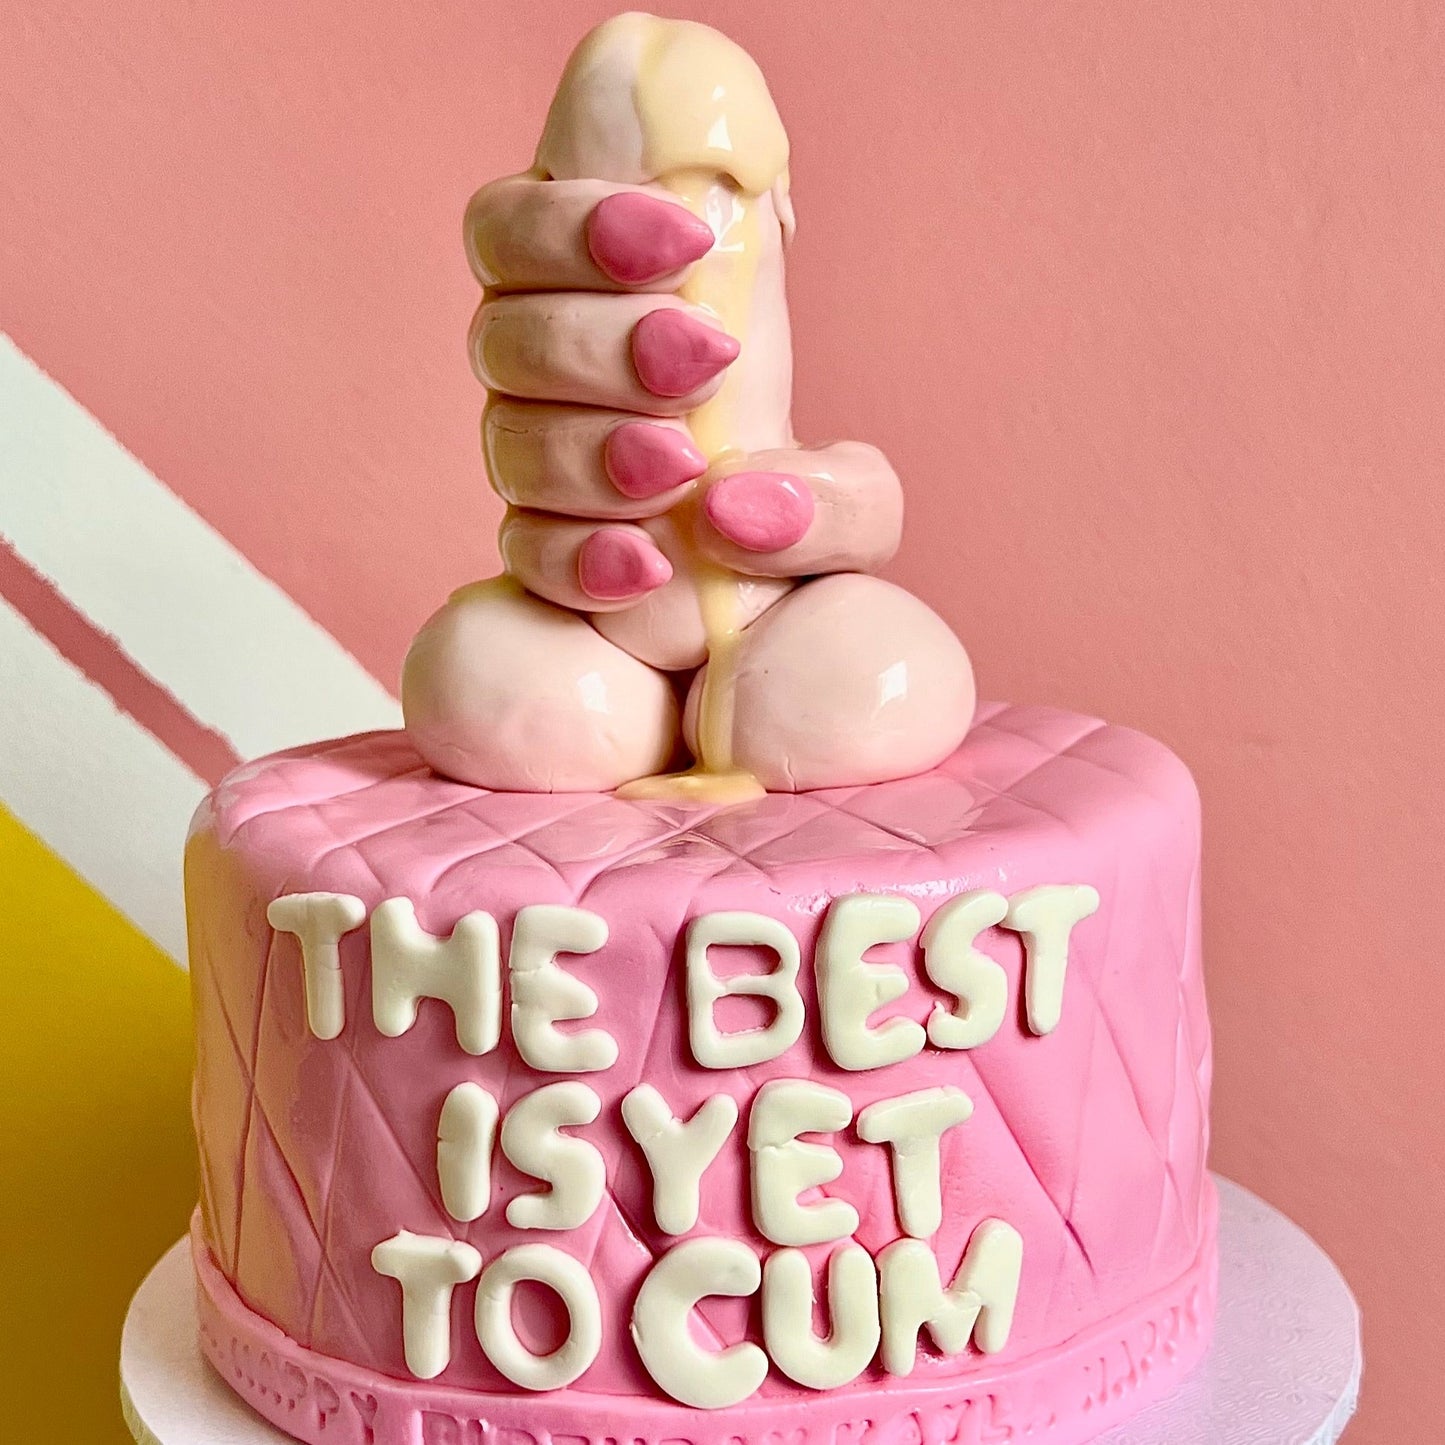 The Best Is Yet To Cum